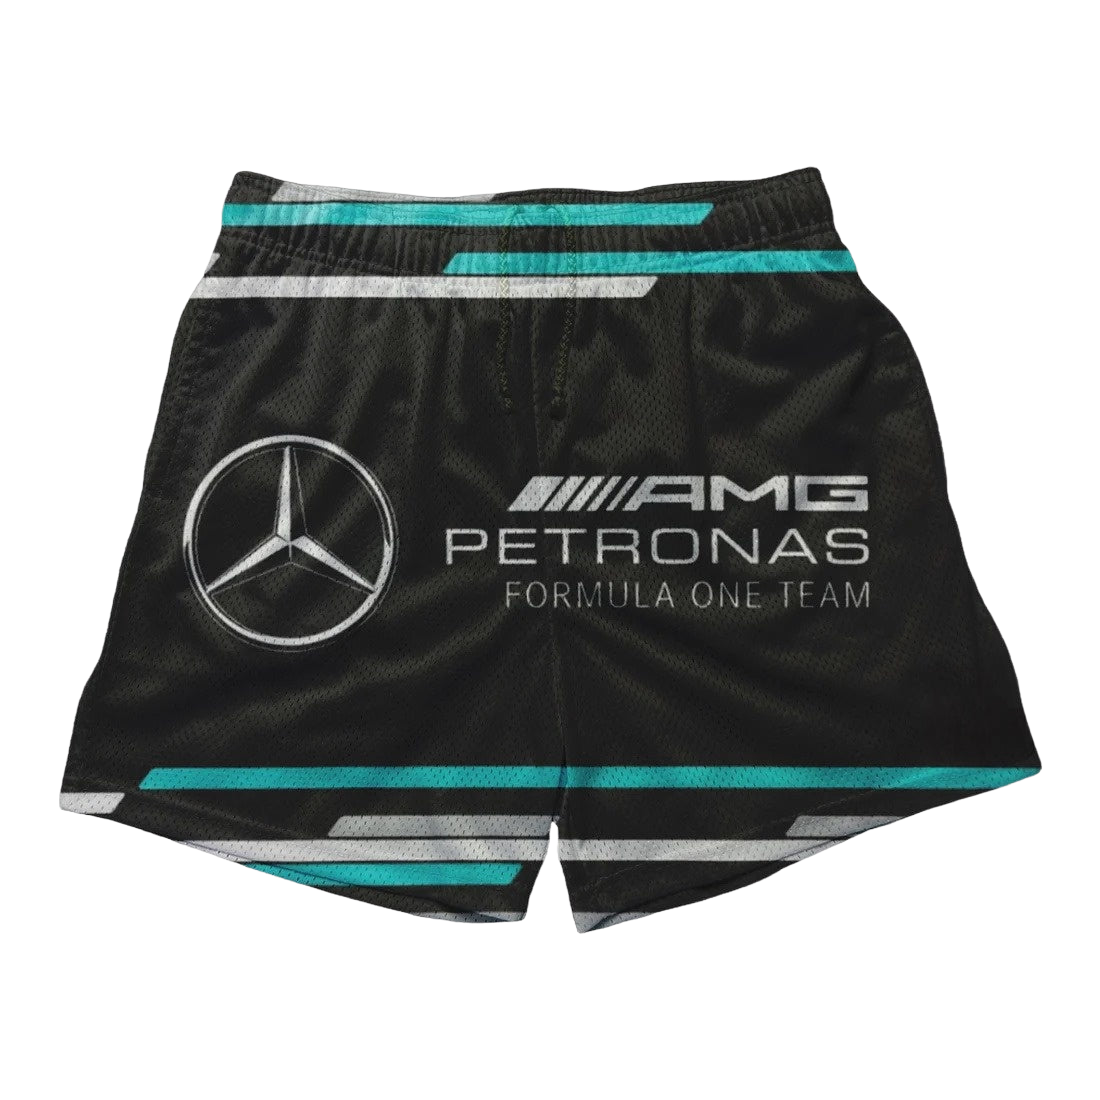 a black shorts with a mercedes logo on it